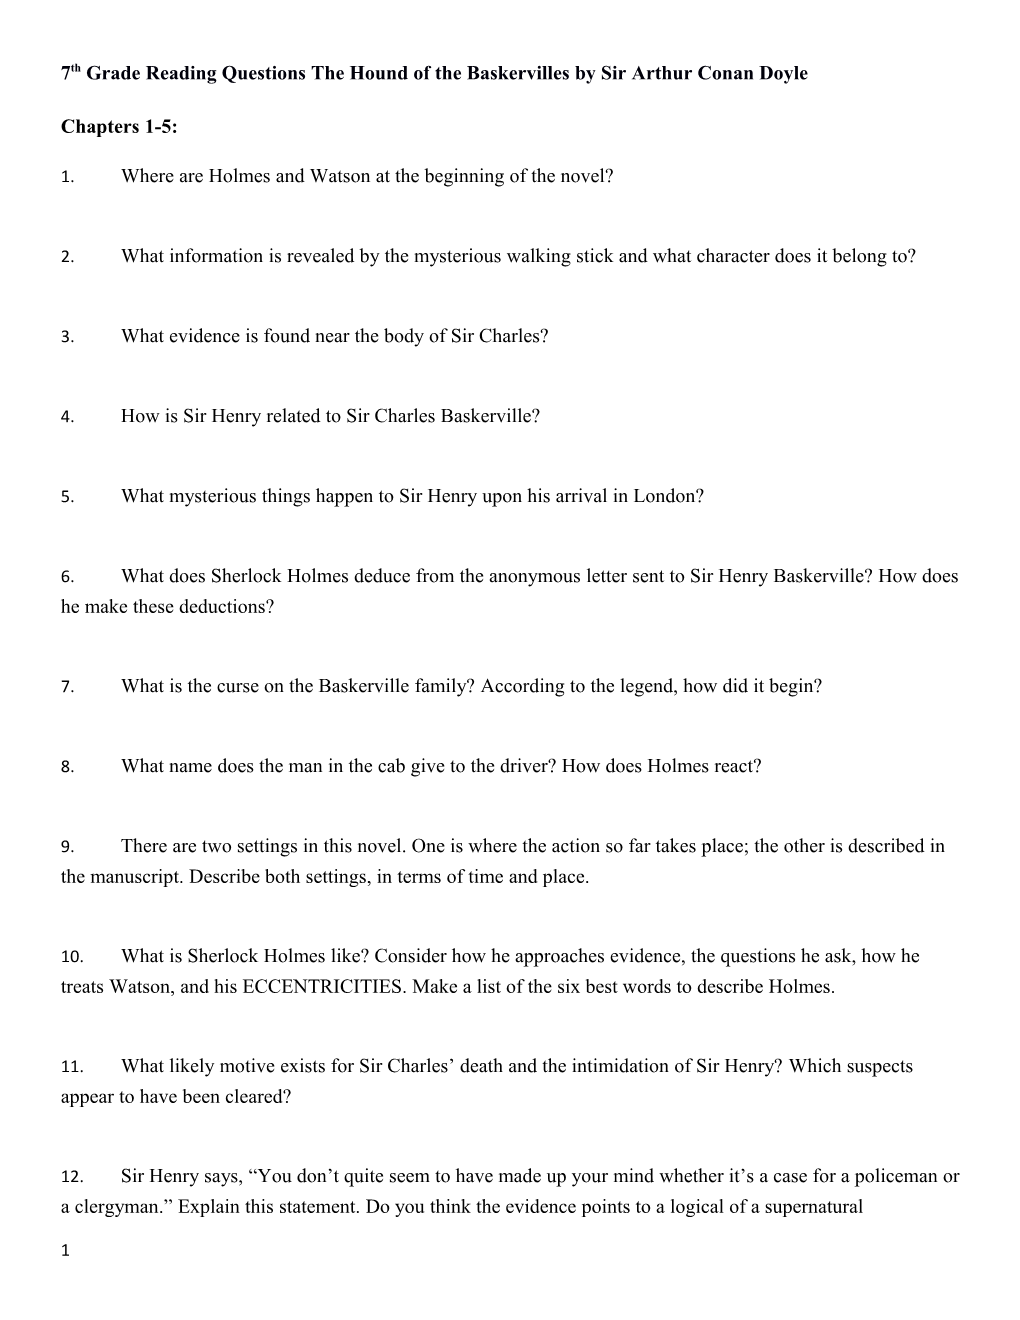 7Th Grade Reading Questions the Hound of the Baskervilles by Sir Arthur Conan Doyle